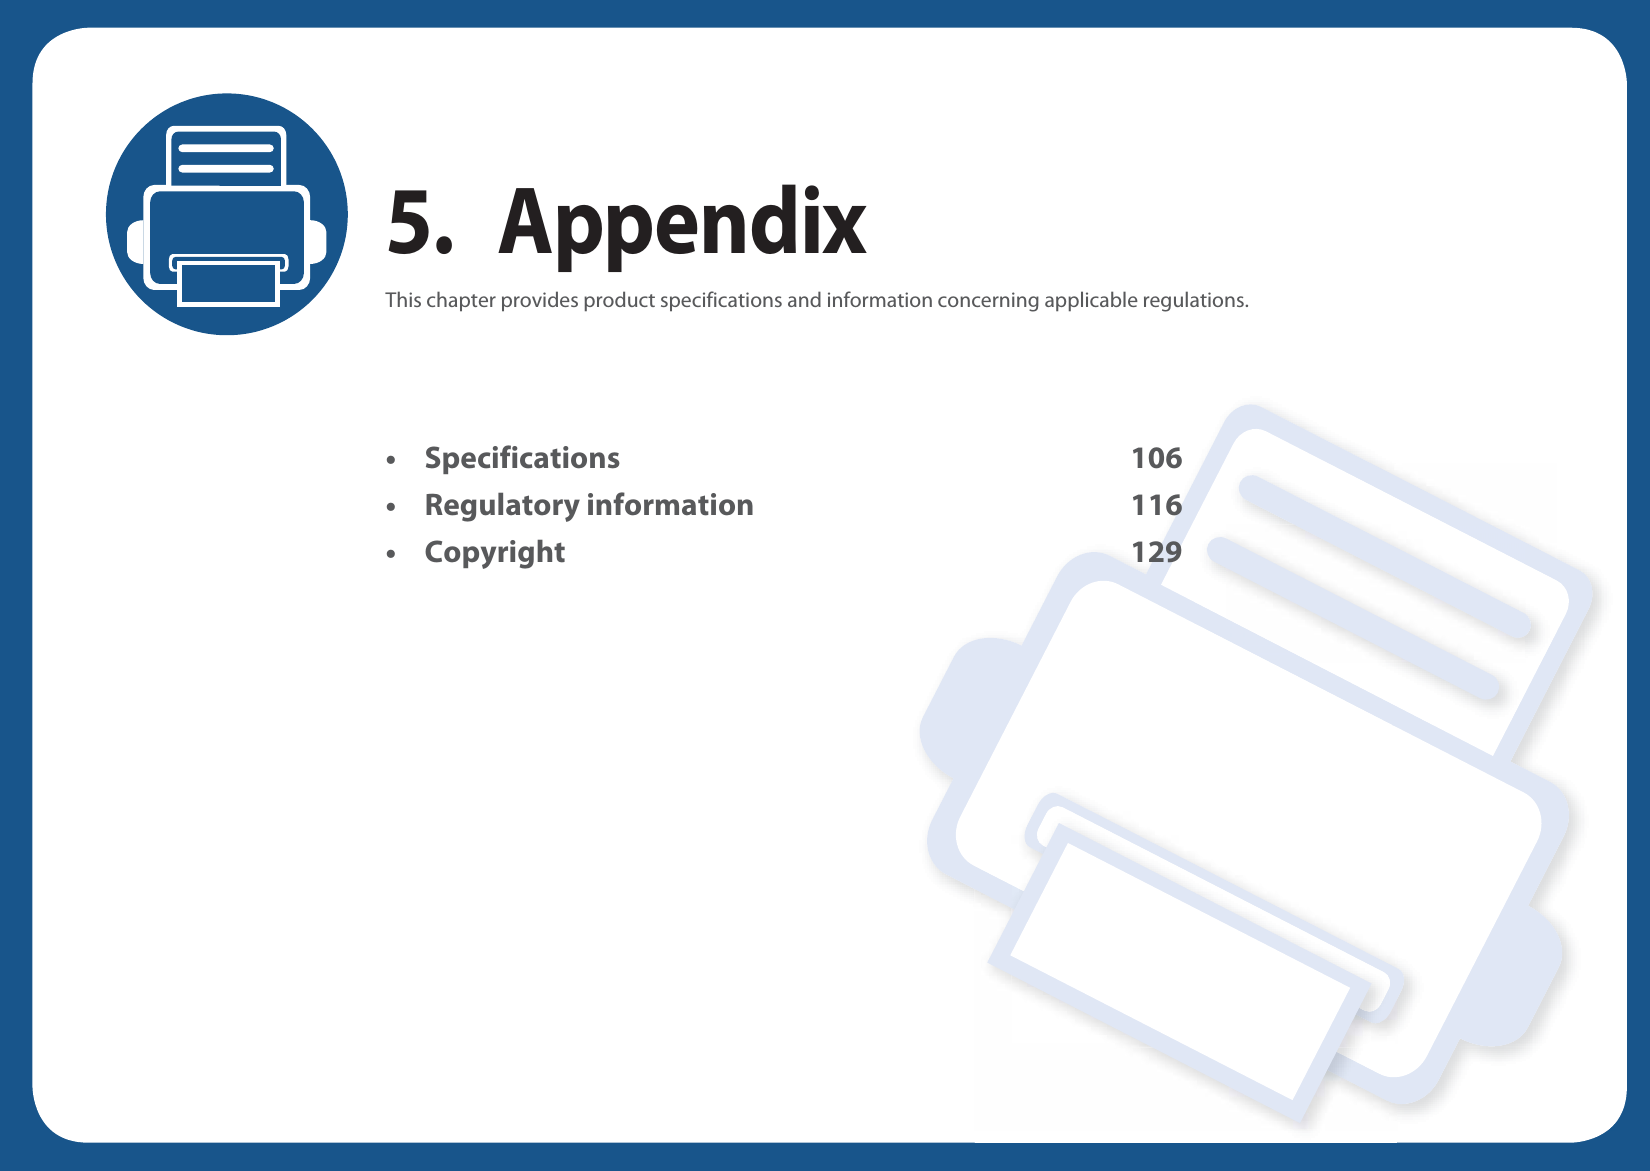 5. AppendixThis chapter provides product specifications and information concerning applicable regulations.• Specifications 106• Regulatory information 116• Copyright 129